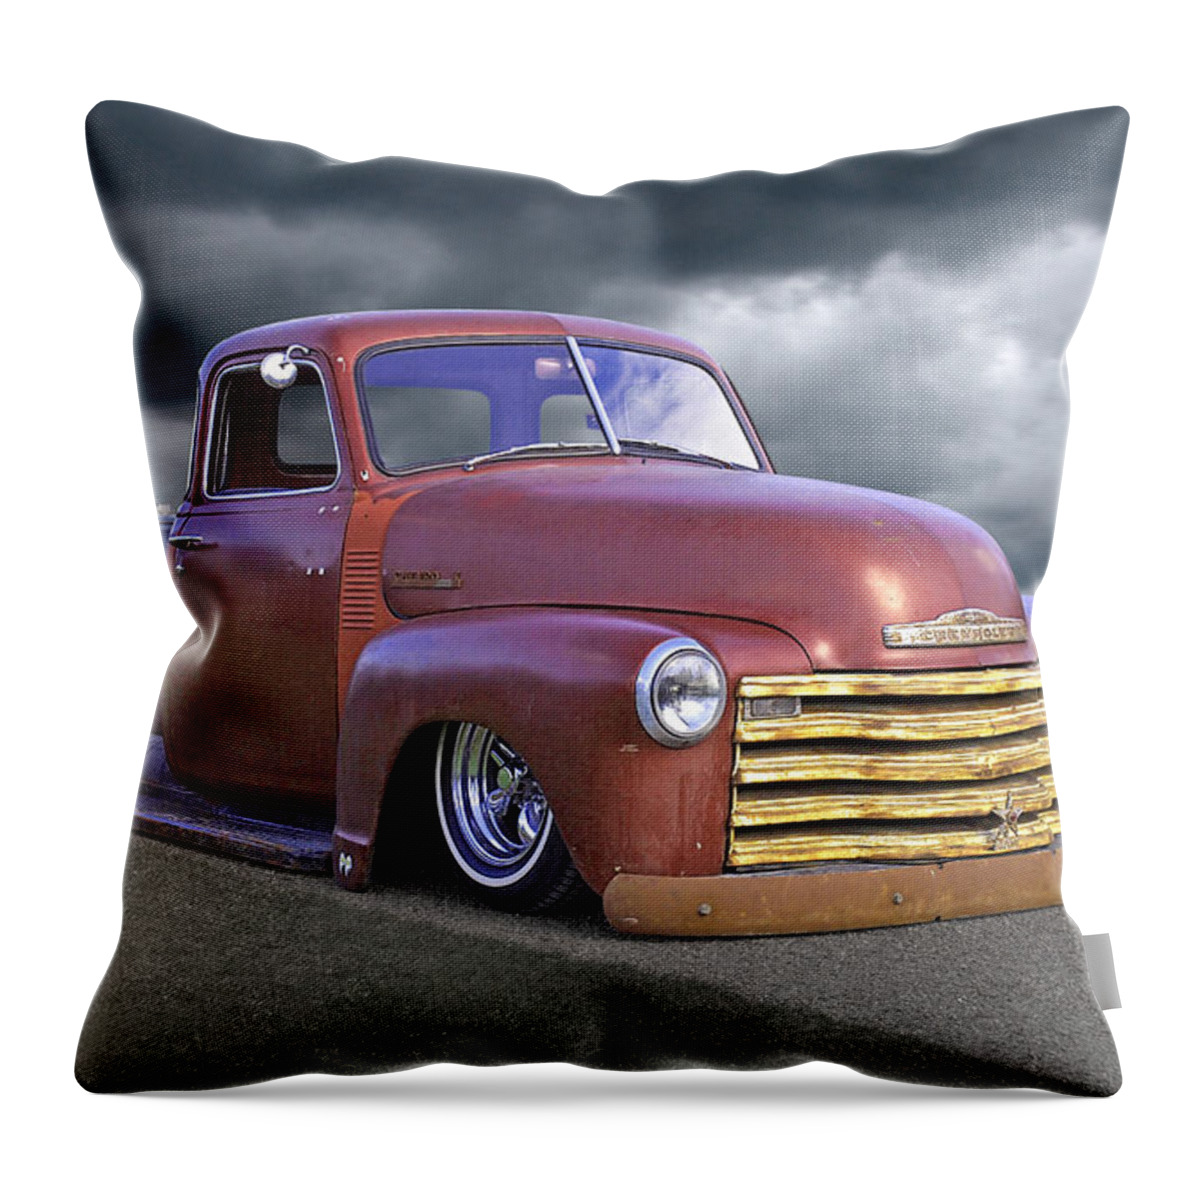 Chevrolet Truck Throw Pillow featuring the photograph Vintage Chevy 1949 by Gill Billington